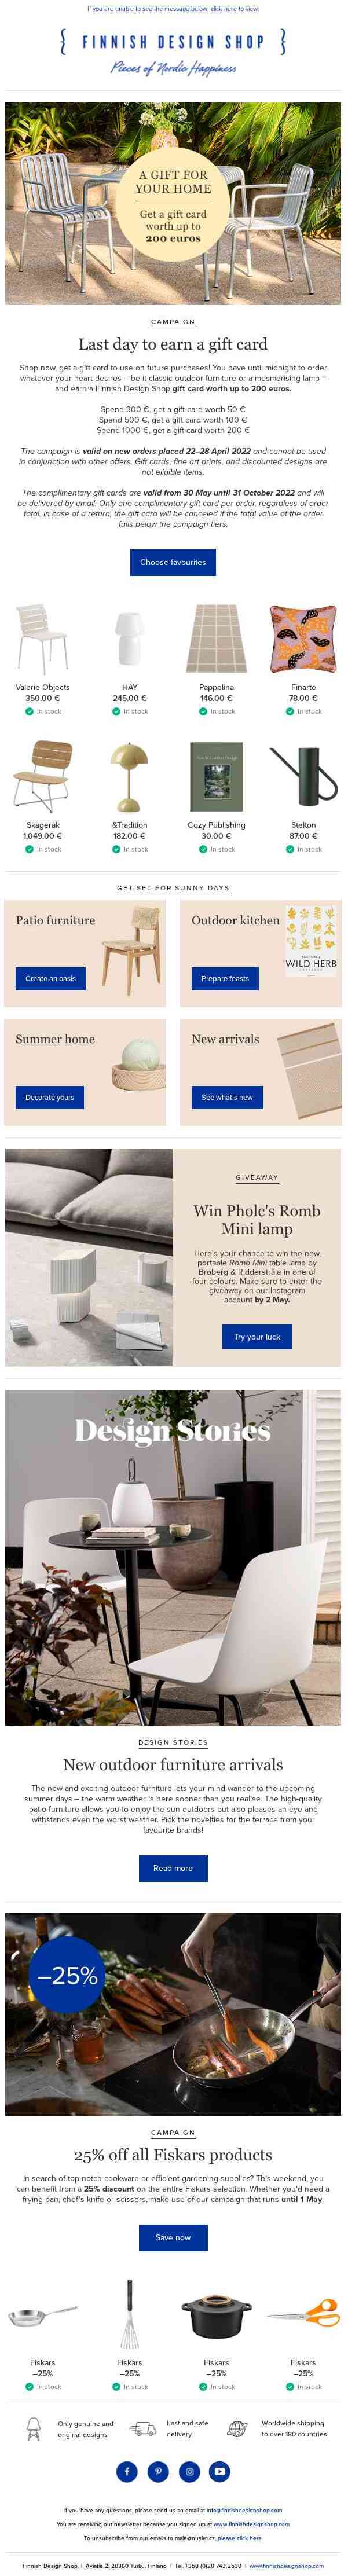 Last day: complimentary gift card | Win a Romb Mini lamp